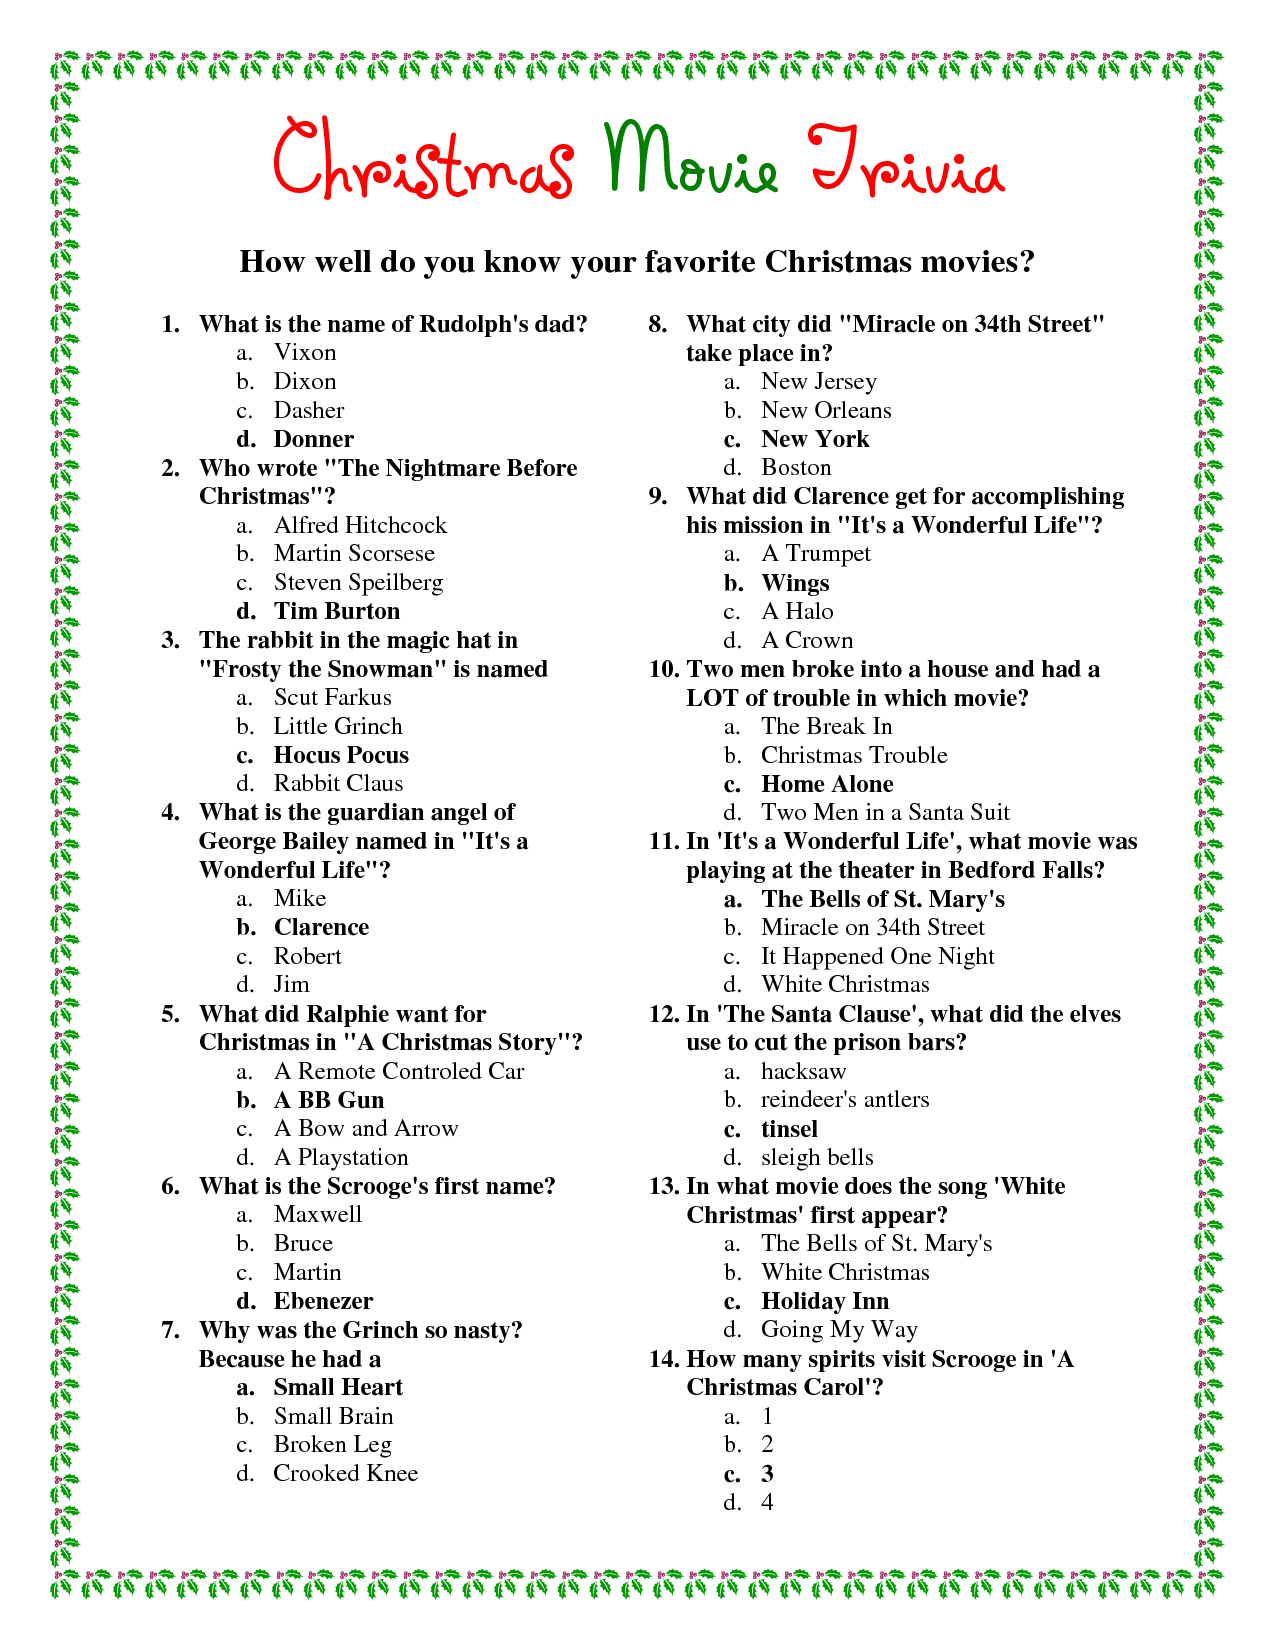 free-printable-bible-trivia-questions-and-answers-free-printable-a-to-z